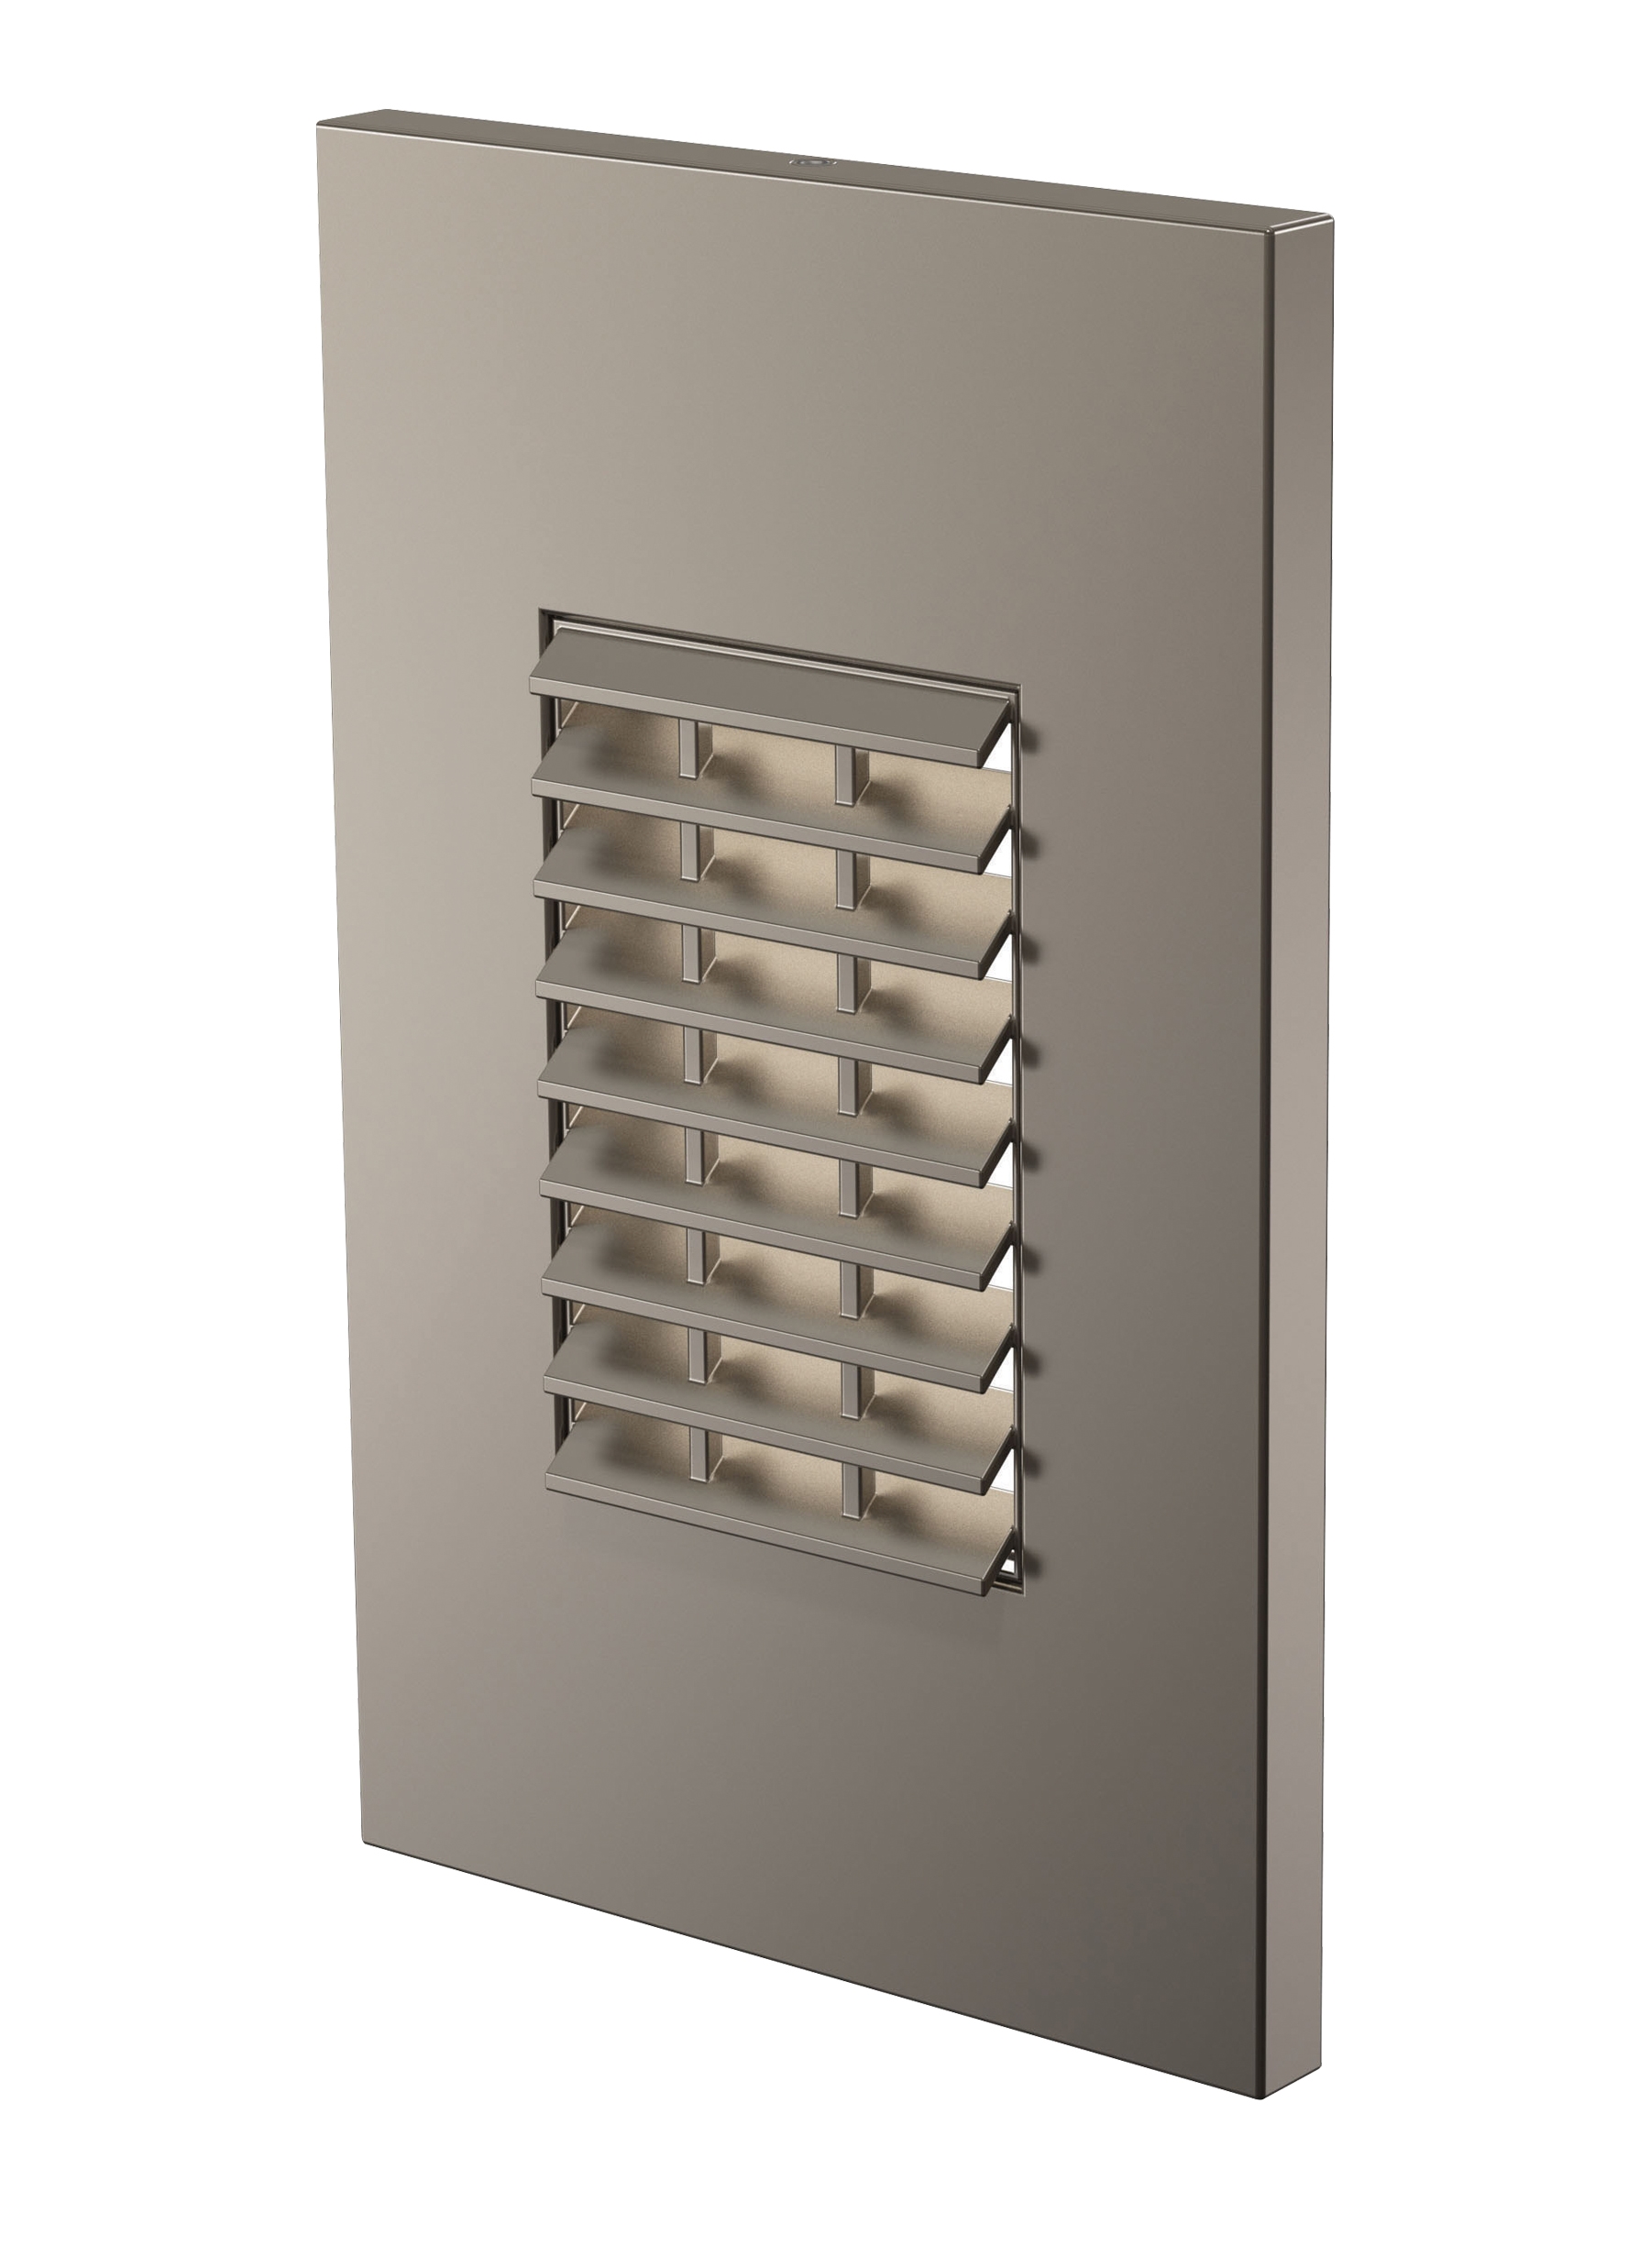 LBl Lighting's new LED Step Lights include this Louver vertical design.